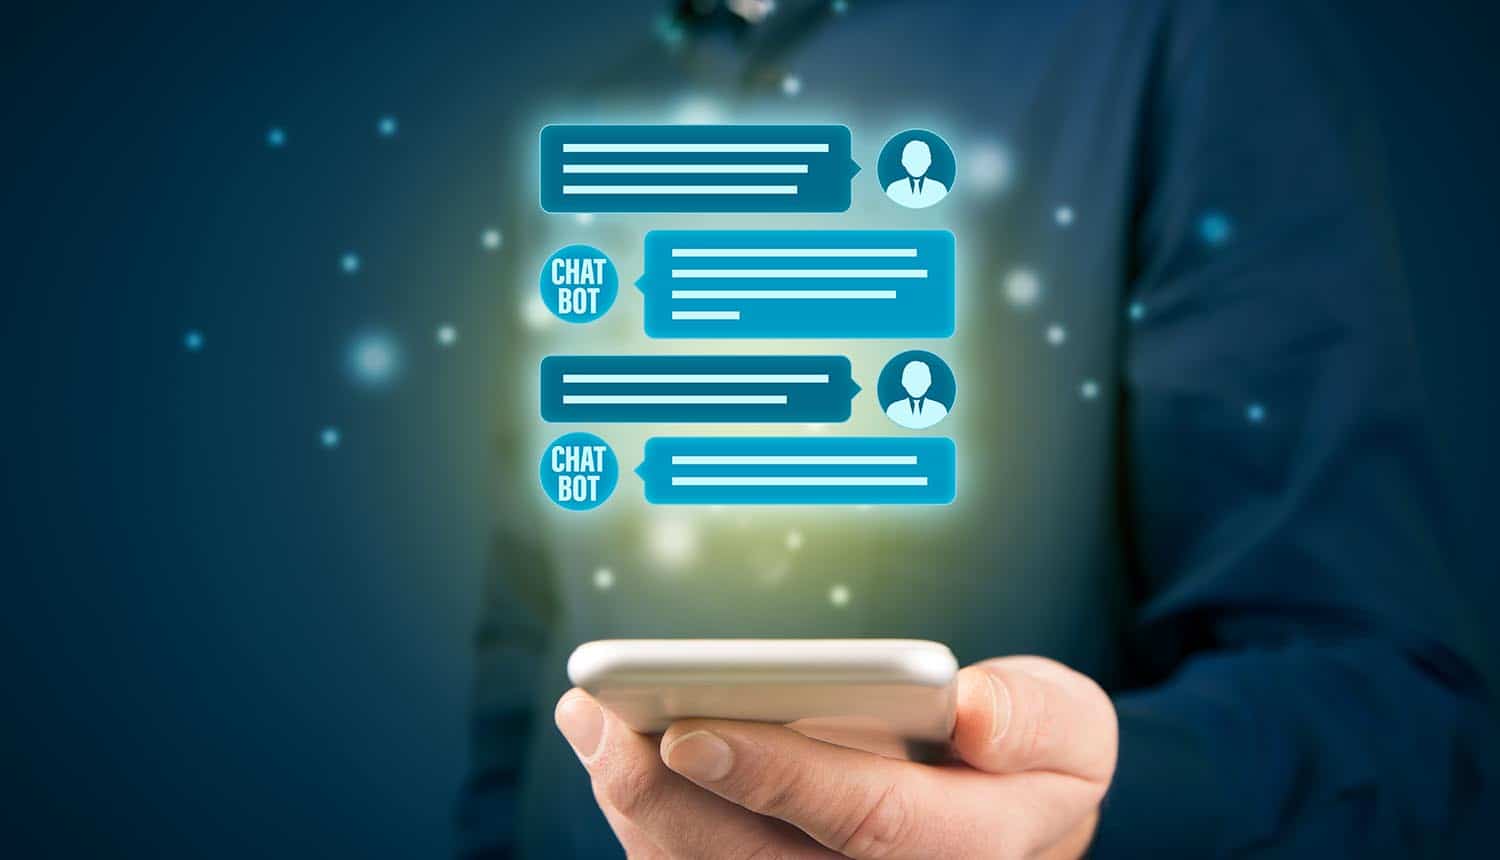 Grab attention and engage customers digitally with chatbots